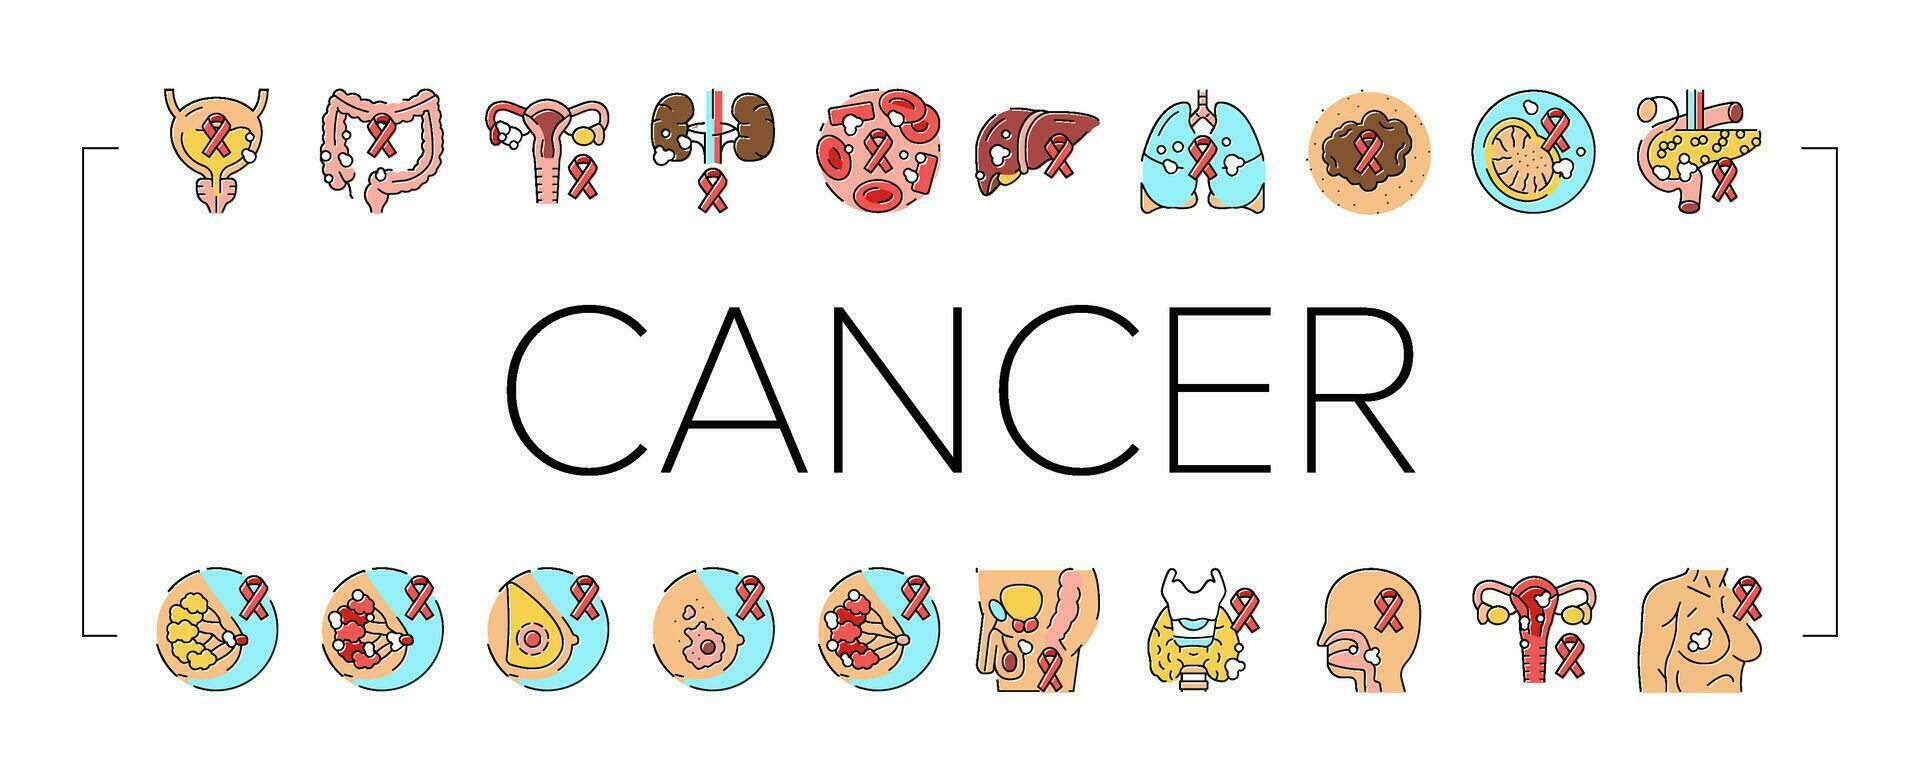 cancer breast health medical icons set vector